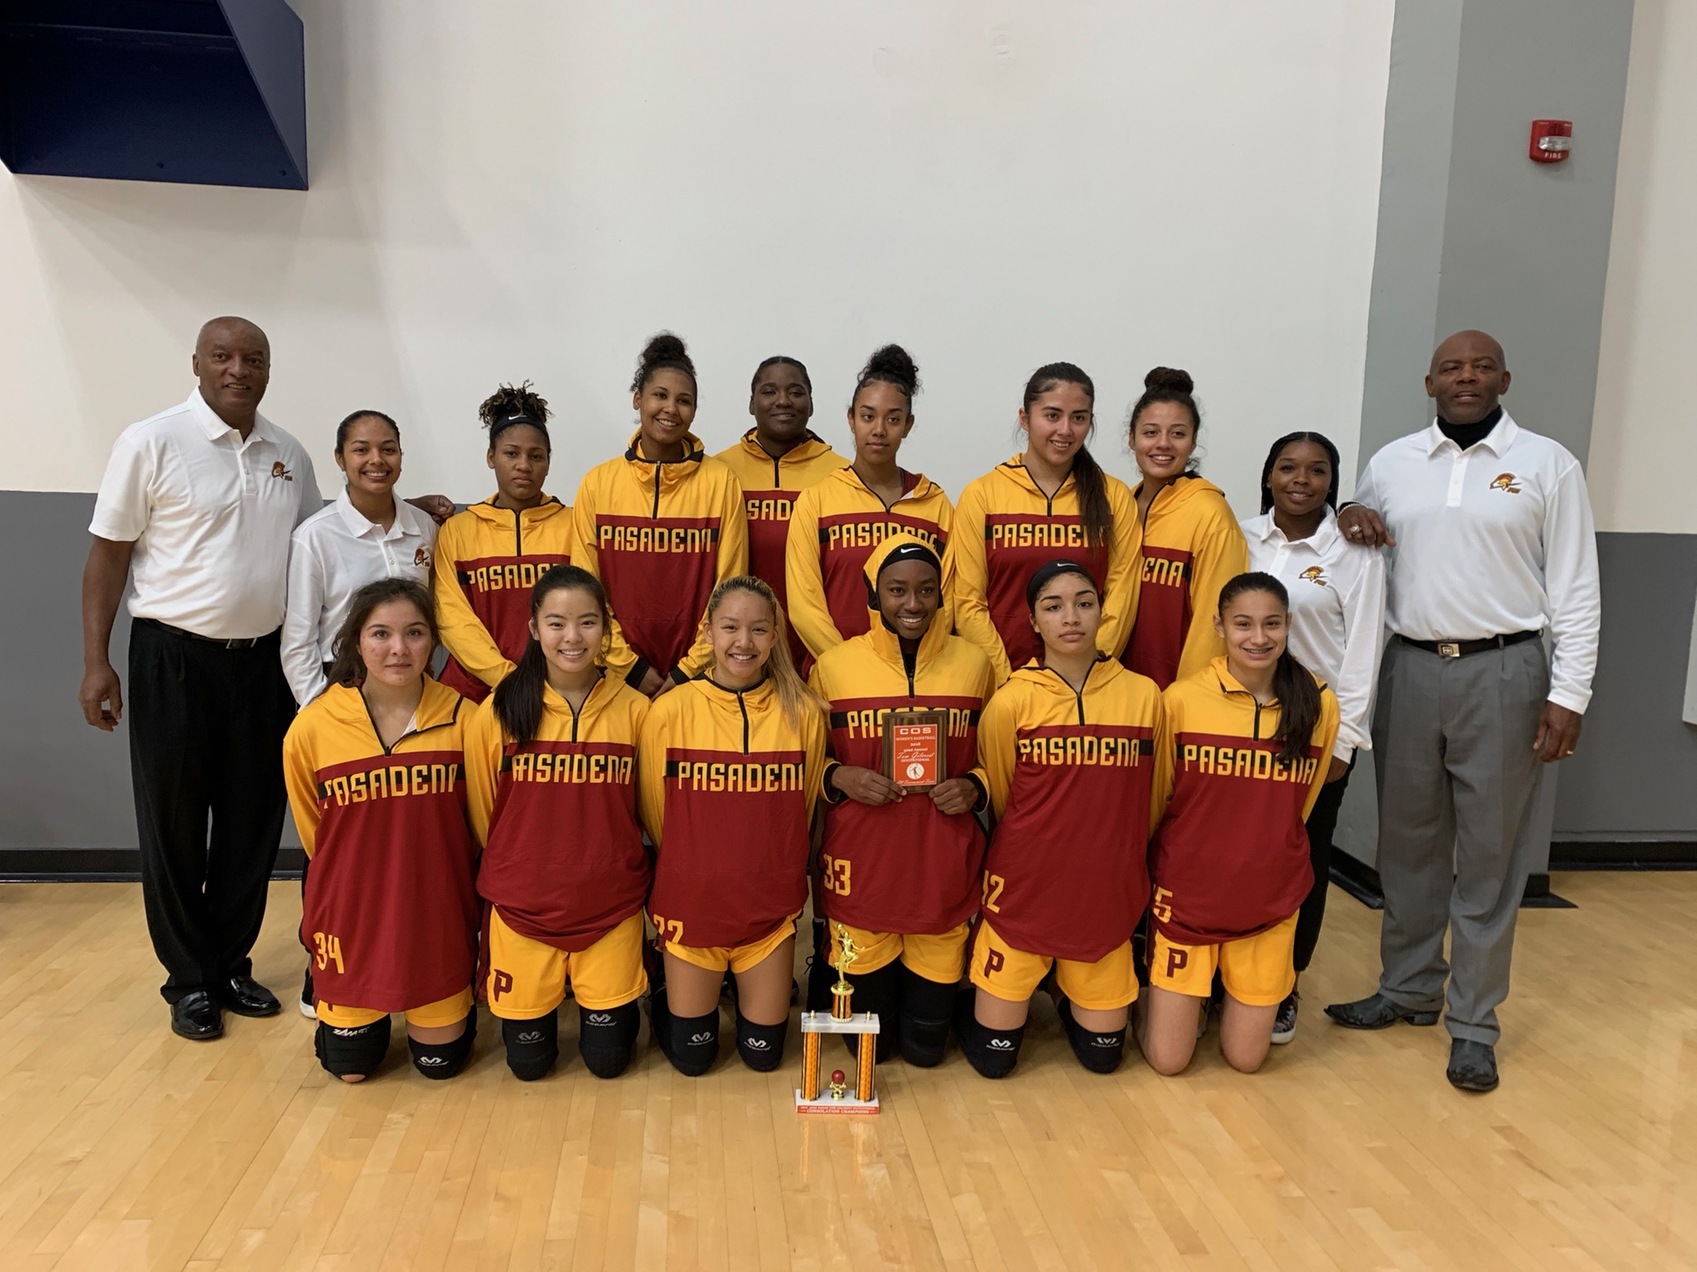 The PCC women's basketball squad takes a team shot following their consolation title at the College of the Sequoias tournament.